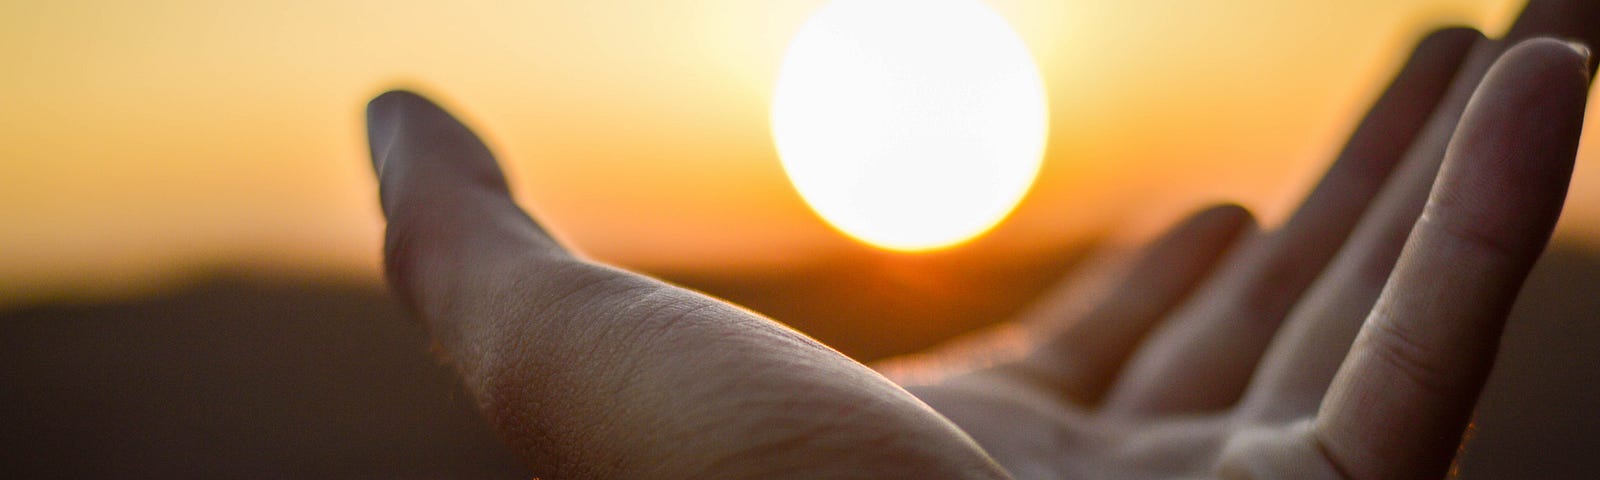 A hand held towards the sun, giving the appearance of holding it.